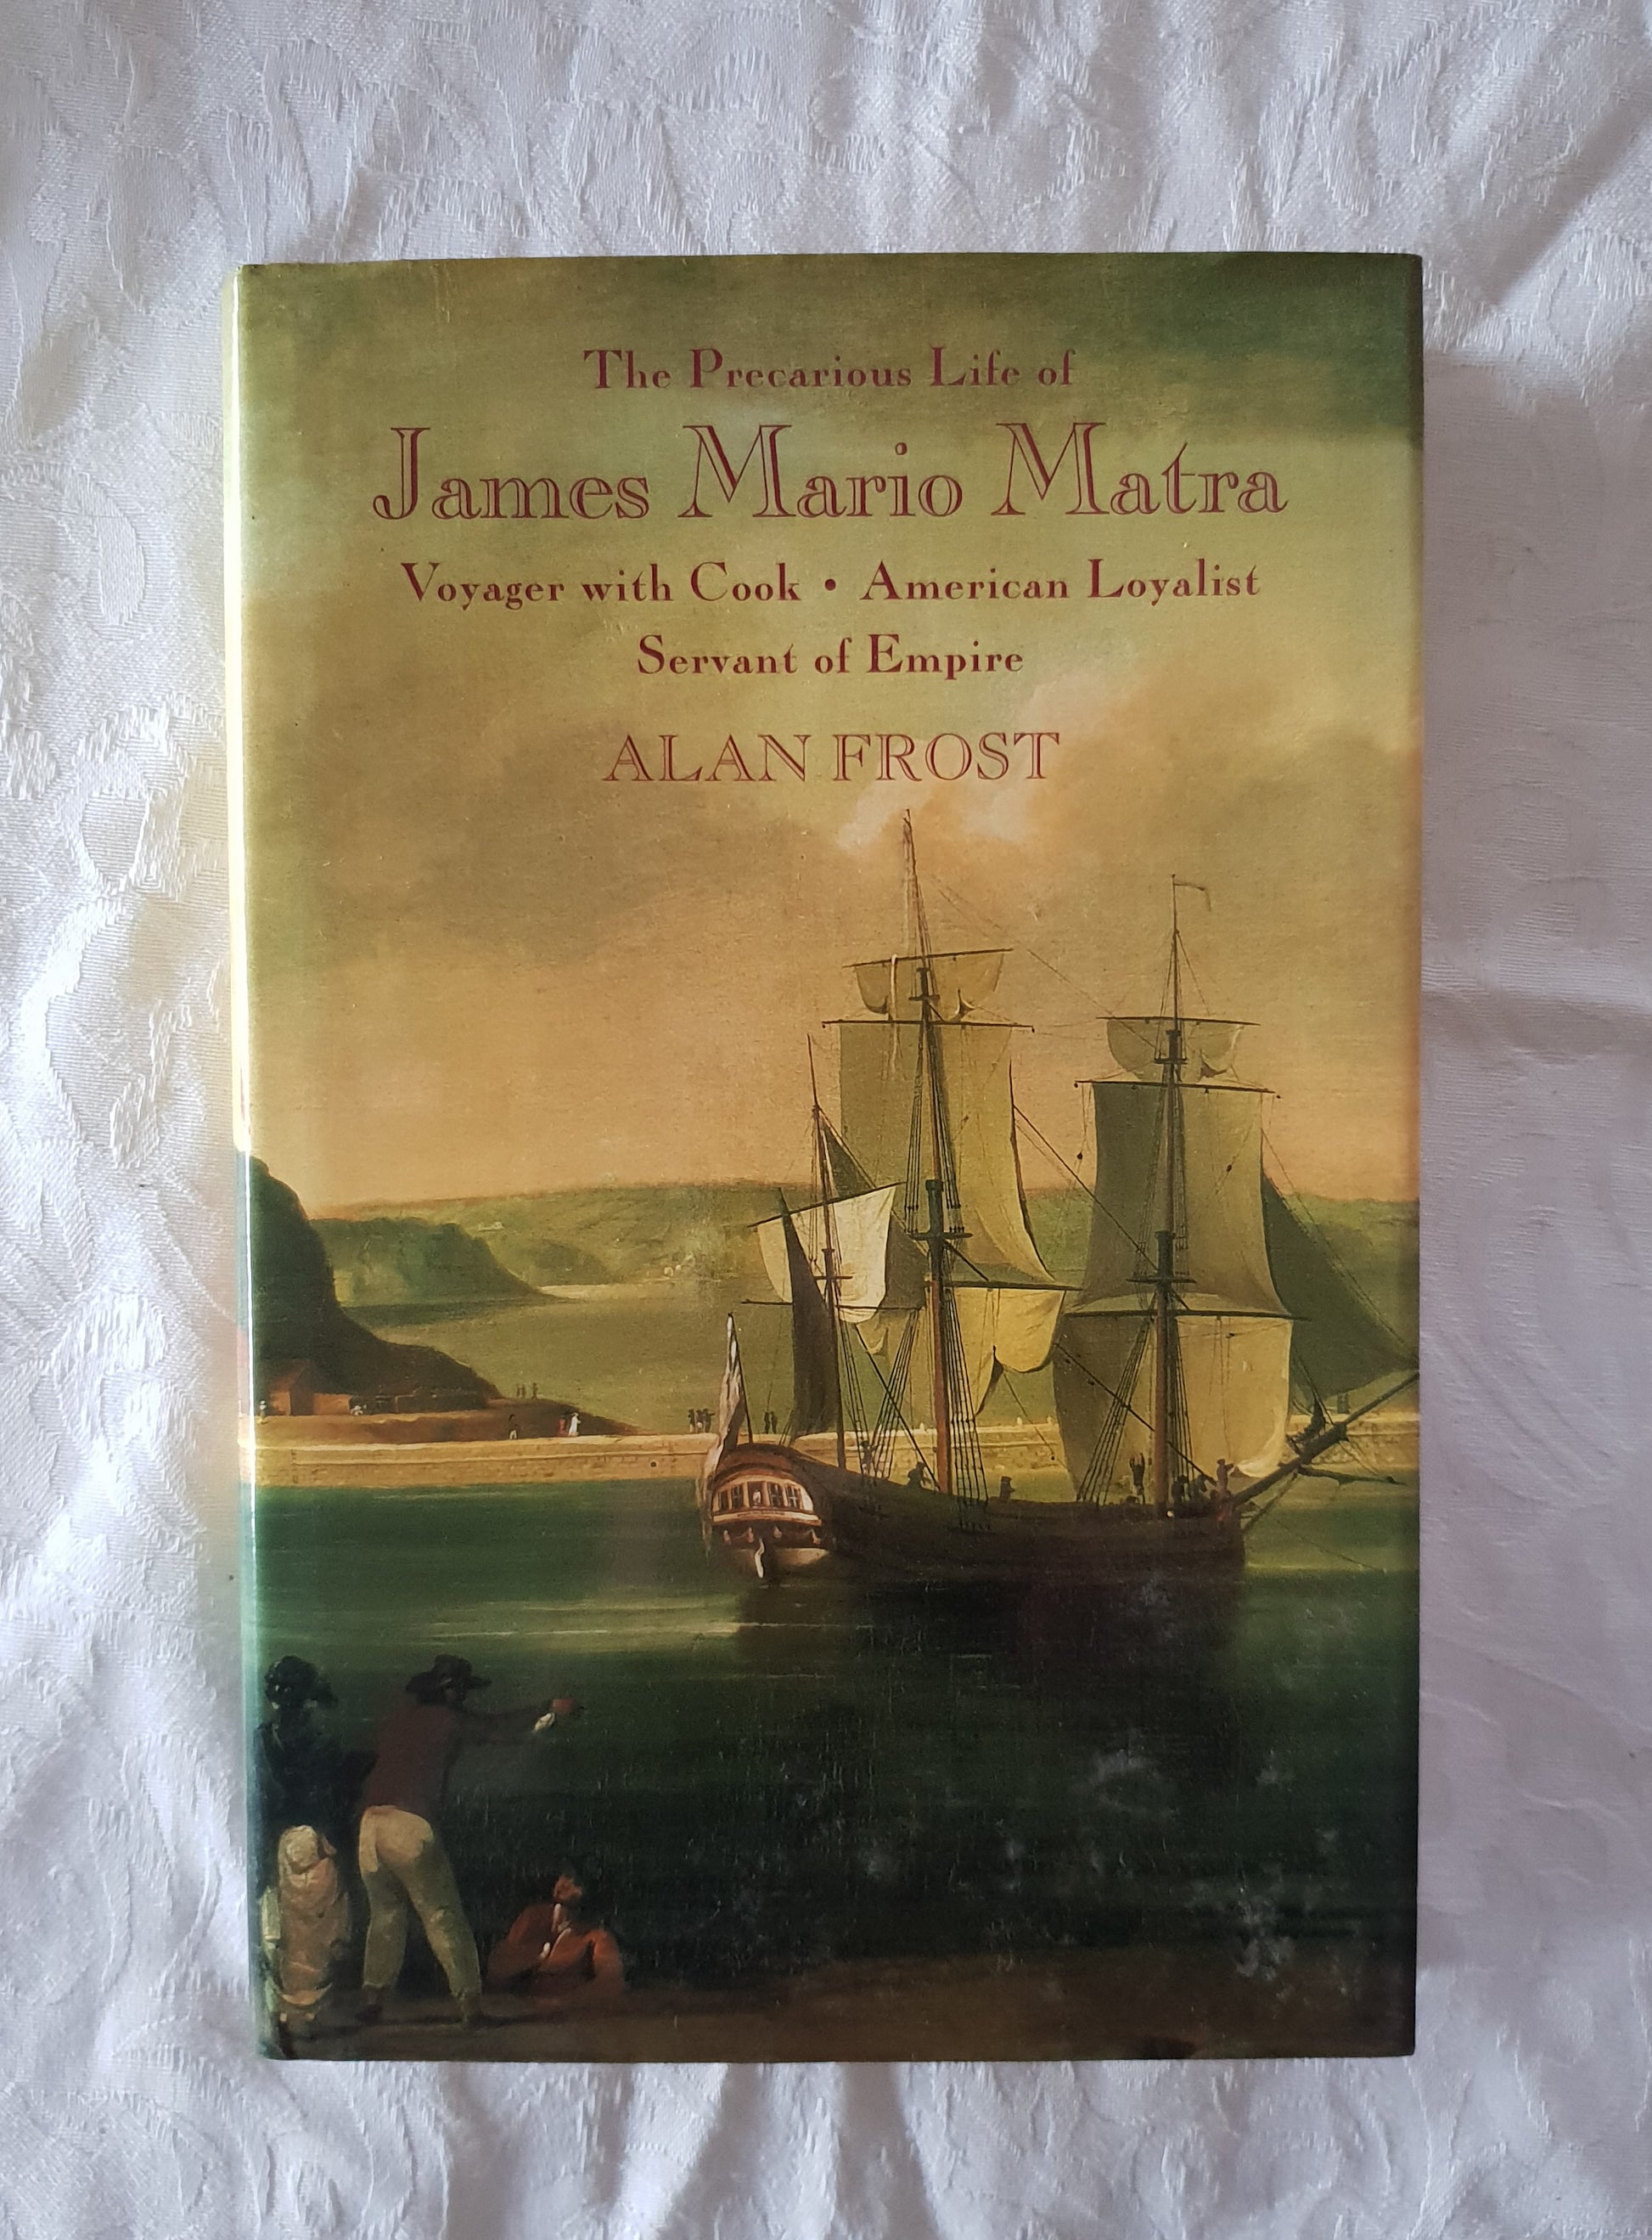 The Precarious Life of James Mario Matra  Voyager with Cook - American Loyalist - Servant of Empire  by Alan Frost, with the assistance of Isabel Moutinho